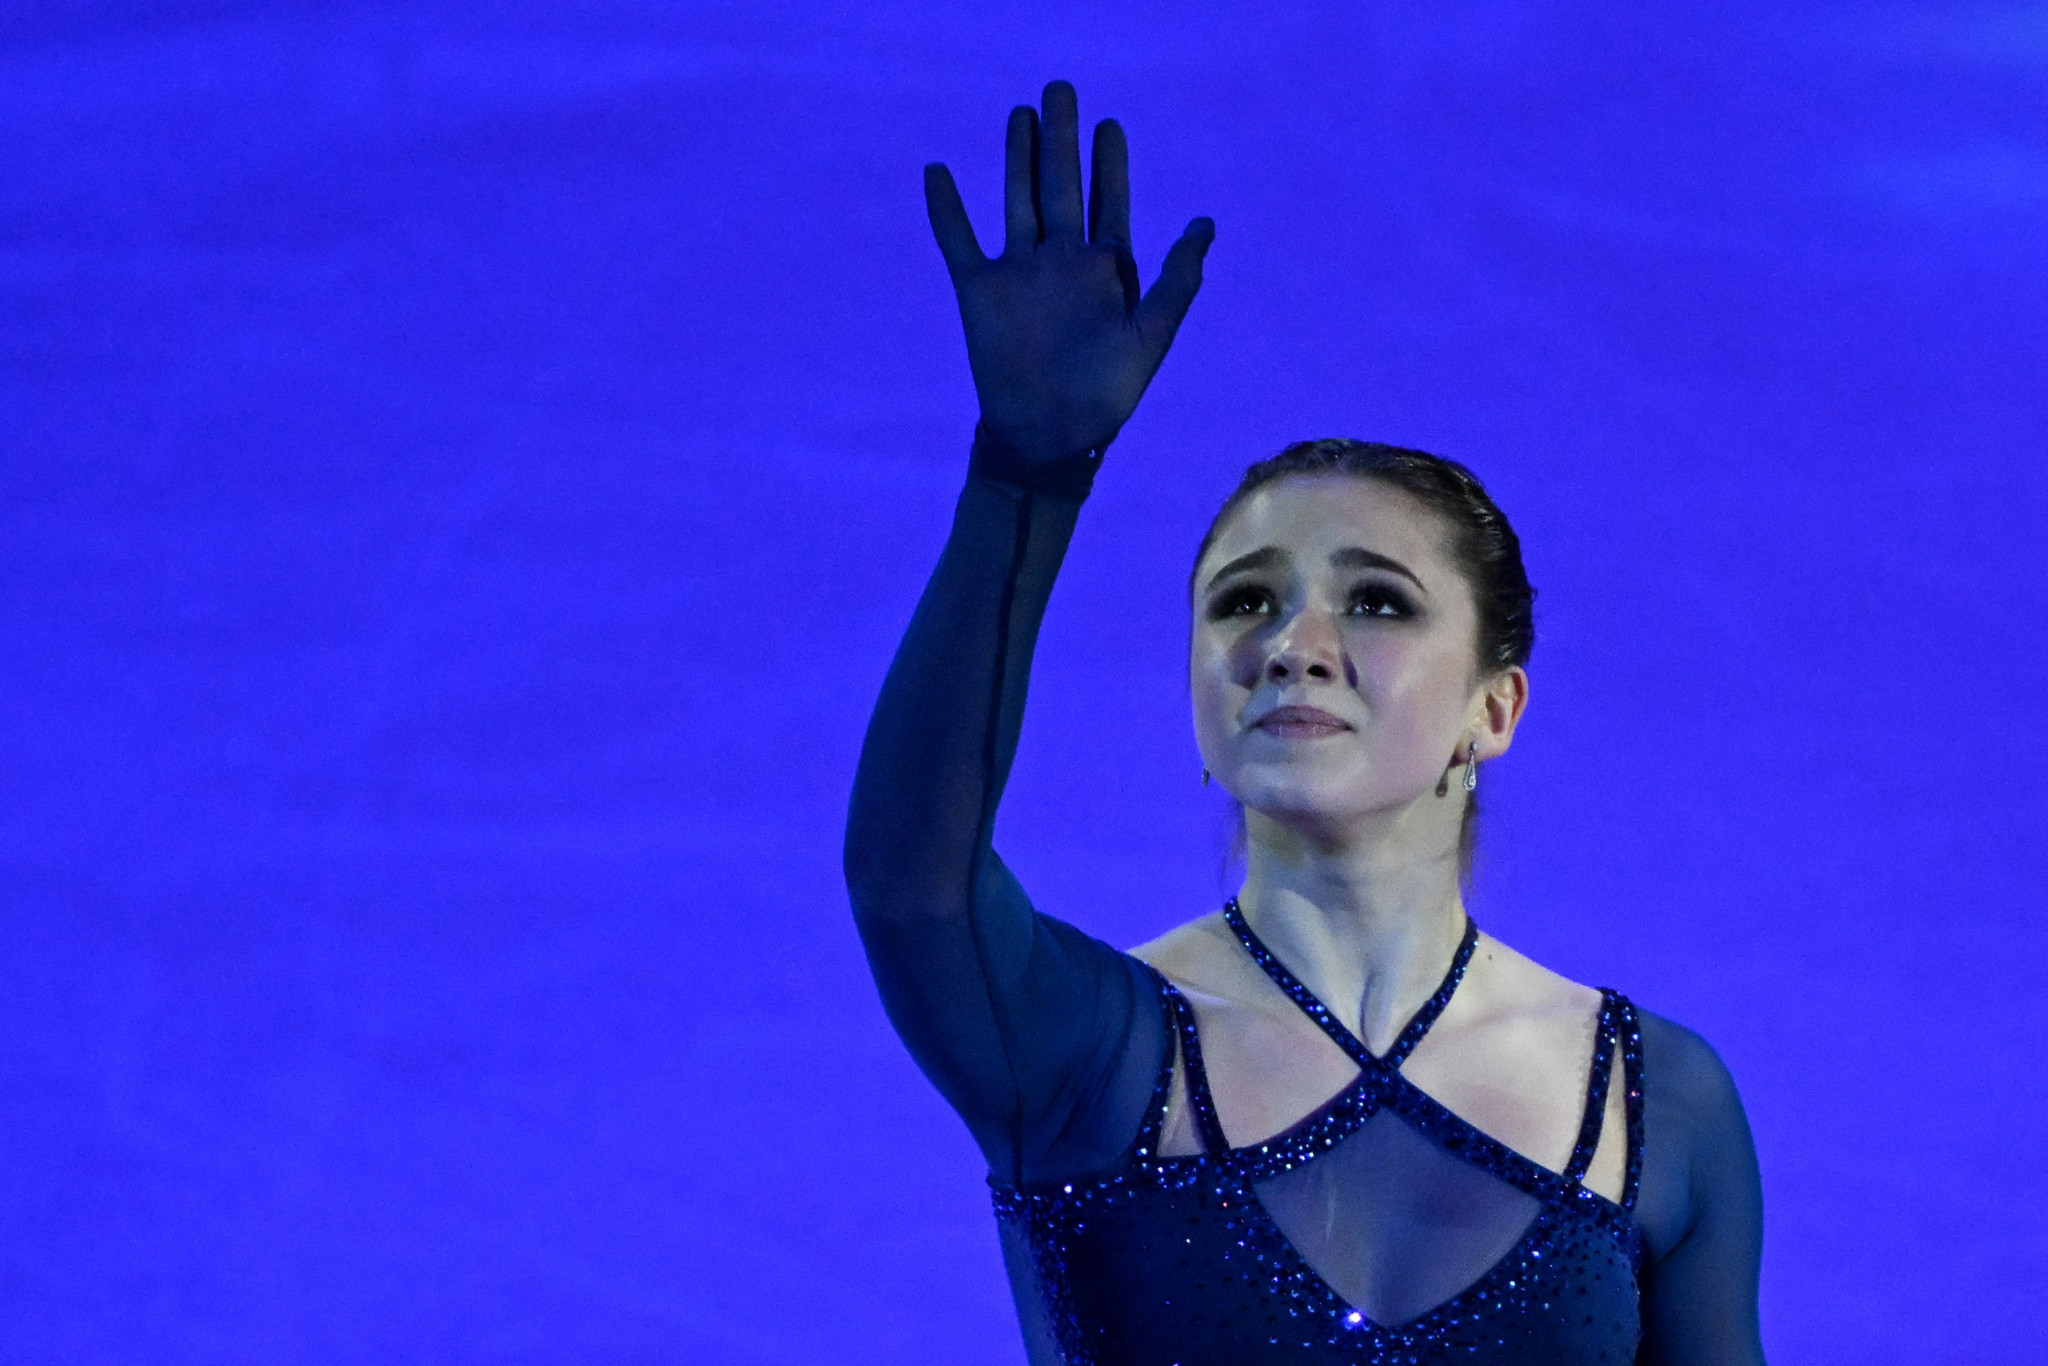 Russian figure skater Kamila Valieva claimed she had "became an adult" through her experience at last year's Winter Olympics in Beijing when she faced allegations of doping ©Getty Images